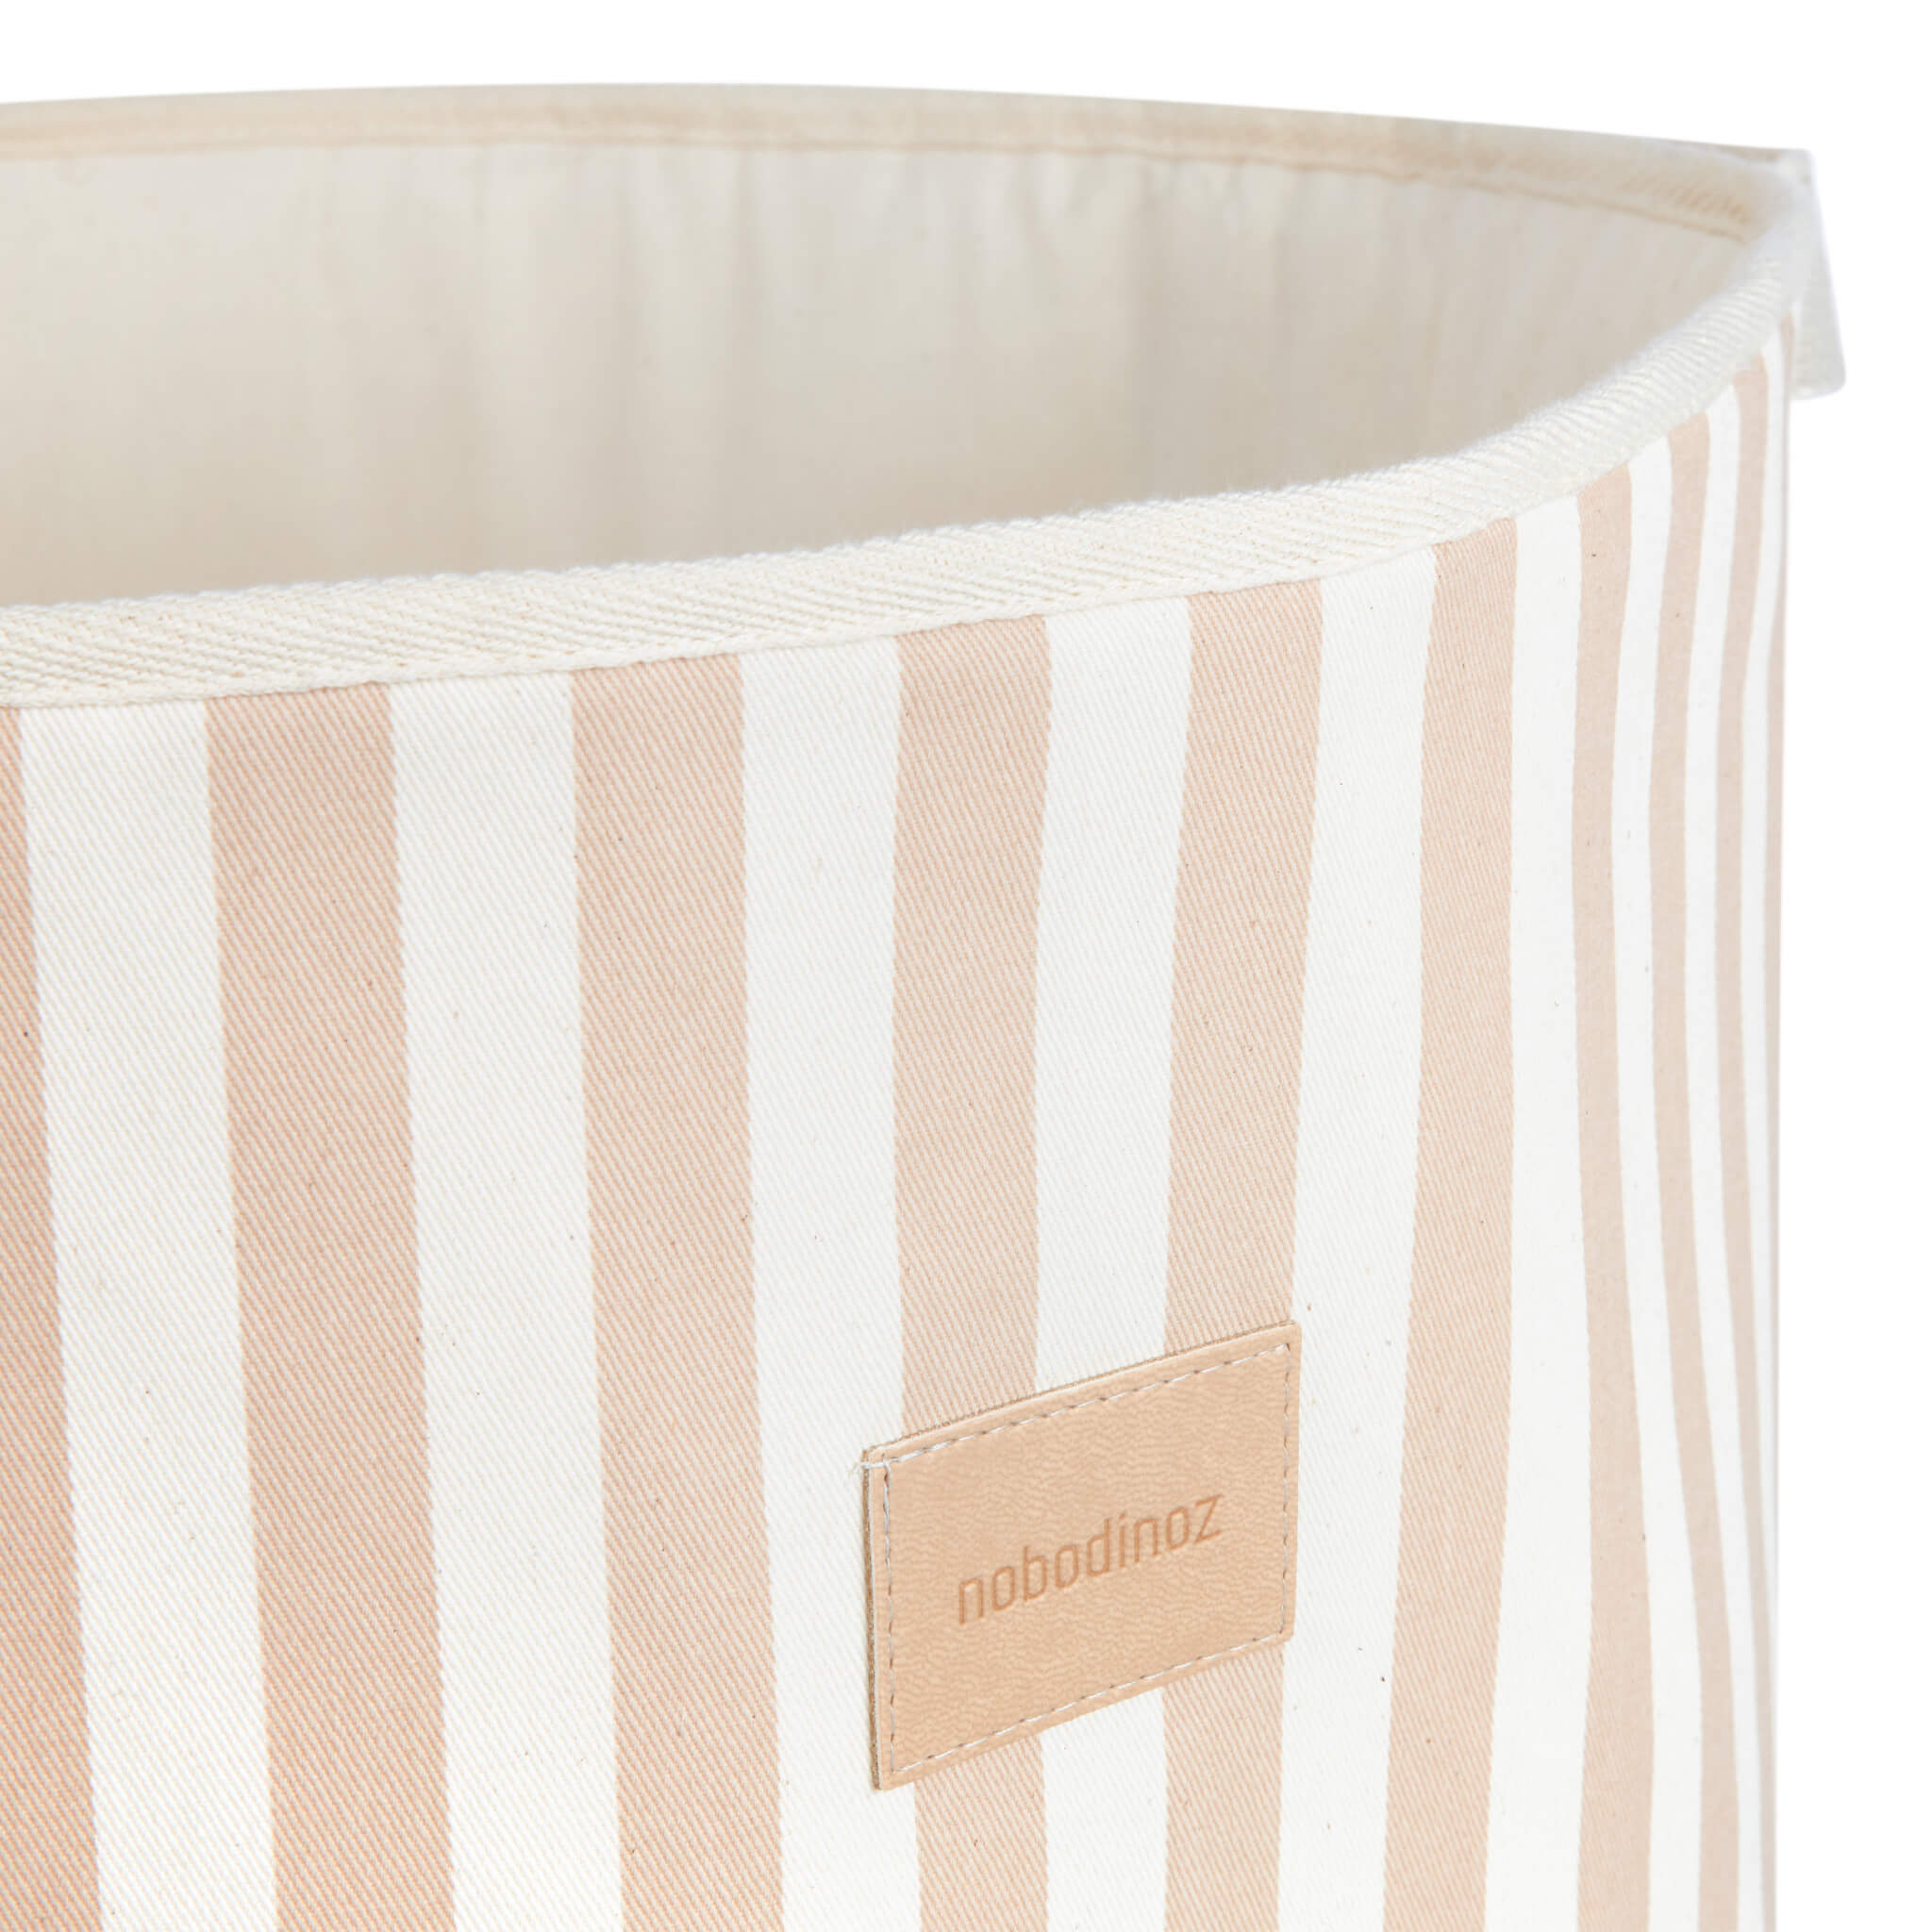 Nobodinoz Odeon Toy Bag in Taupe Stripes Details